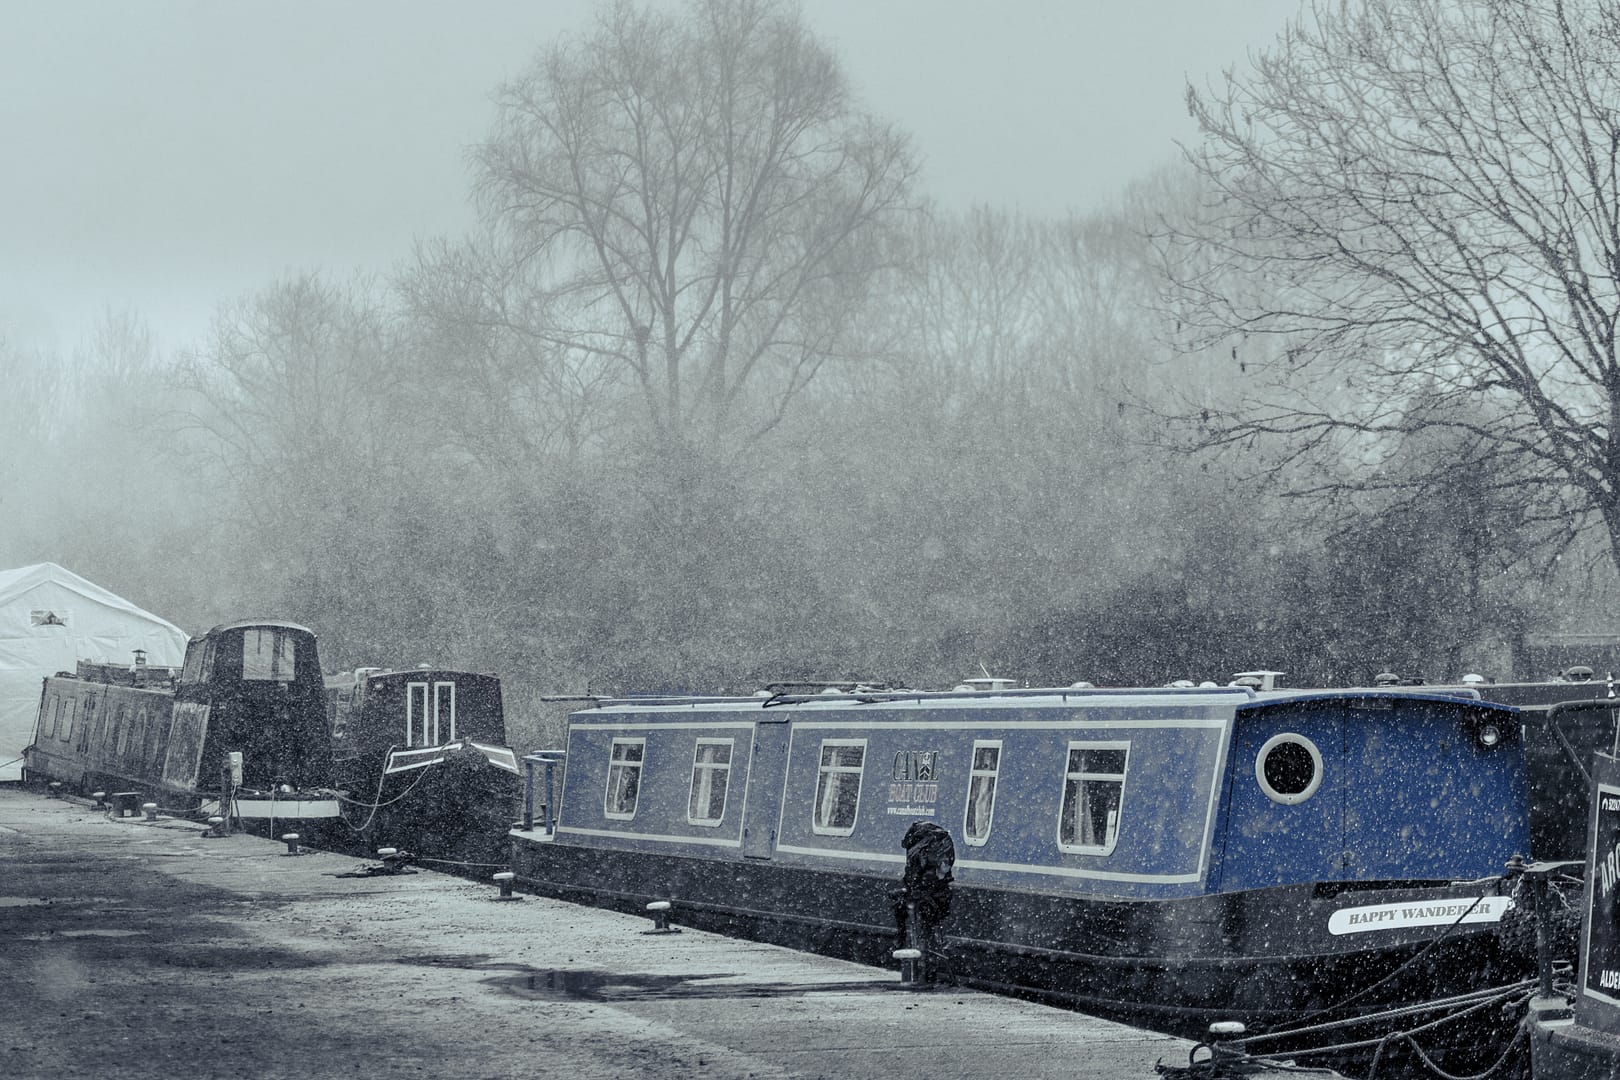 Snow on the Narrow Boats of the Kennet and Avon Canal.